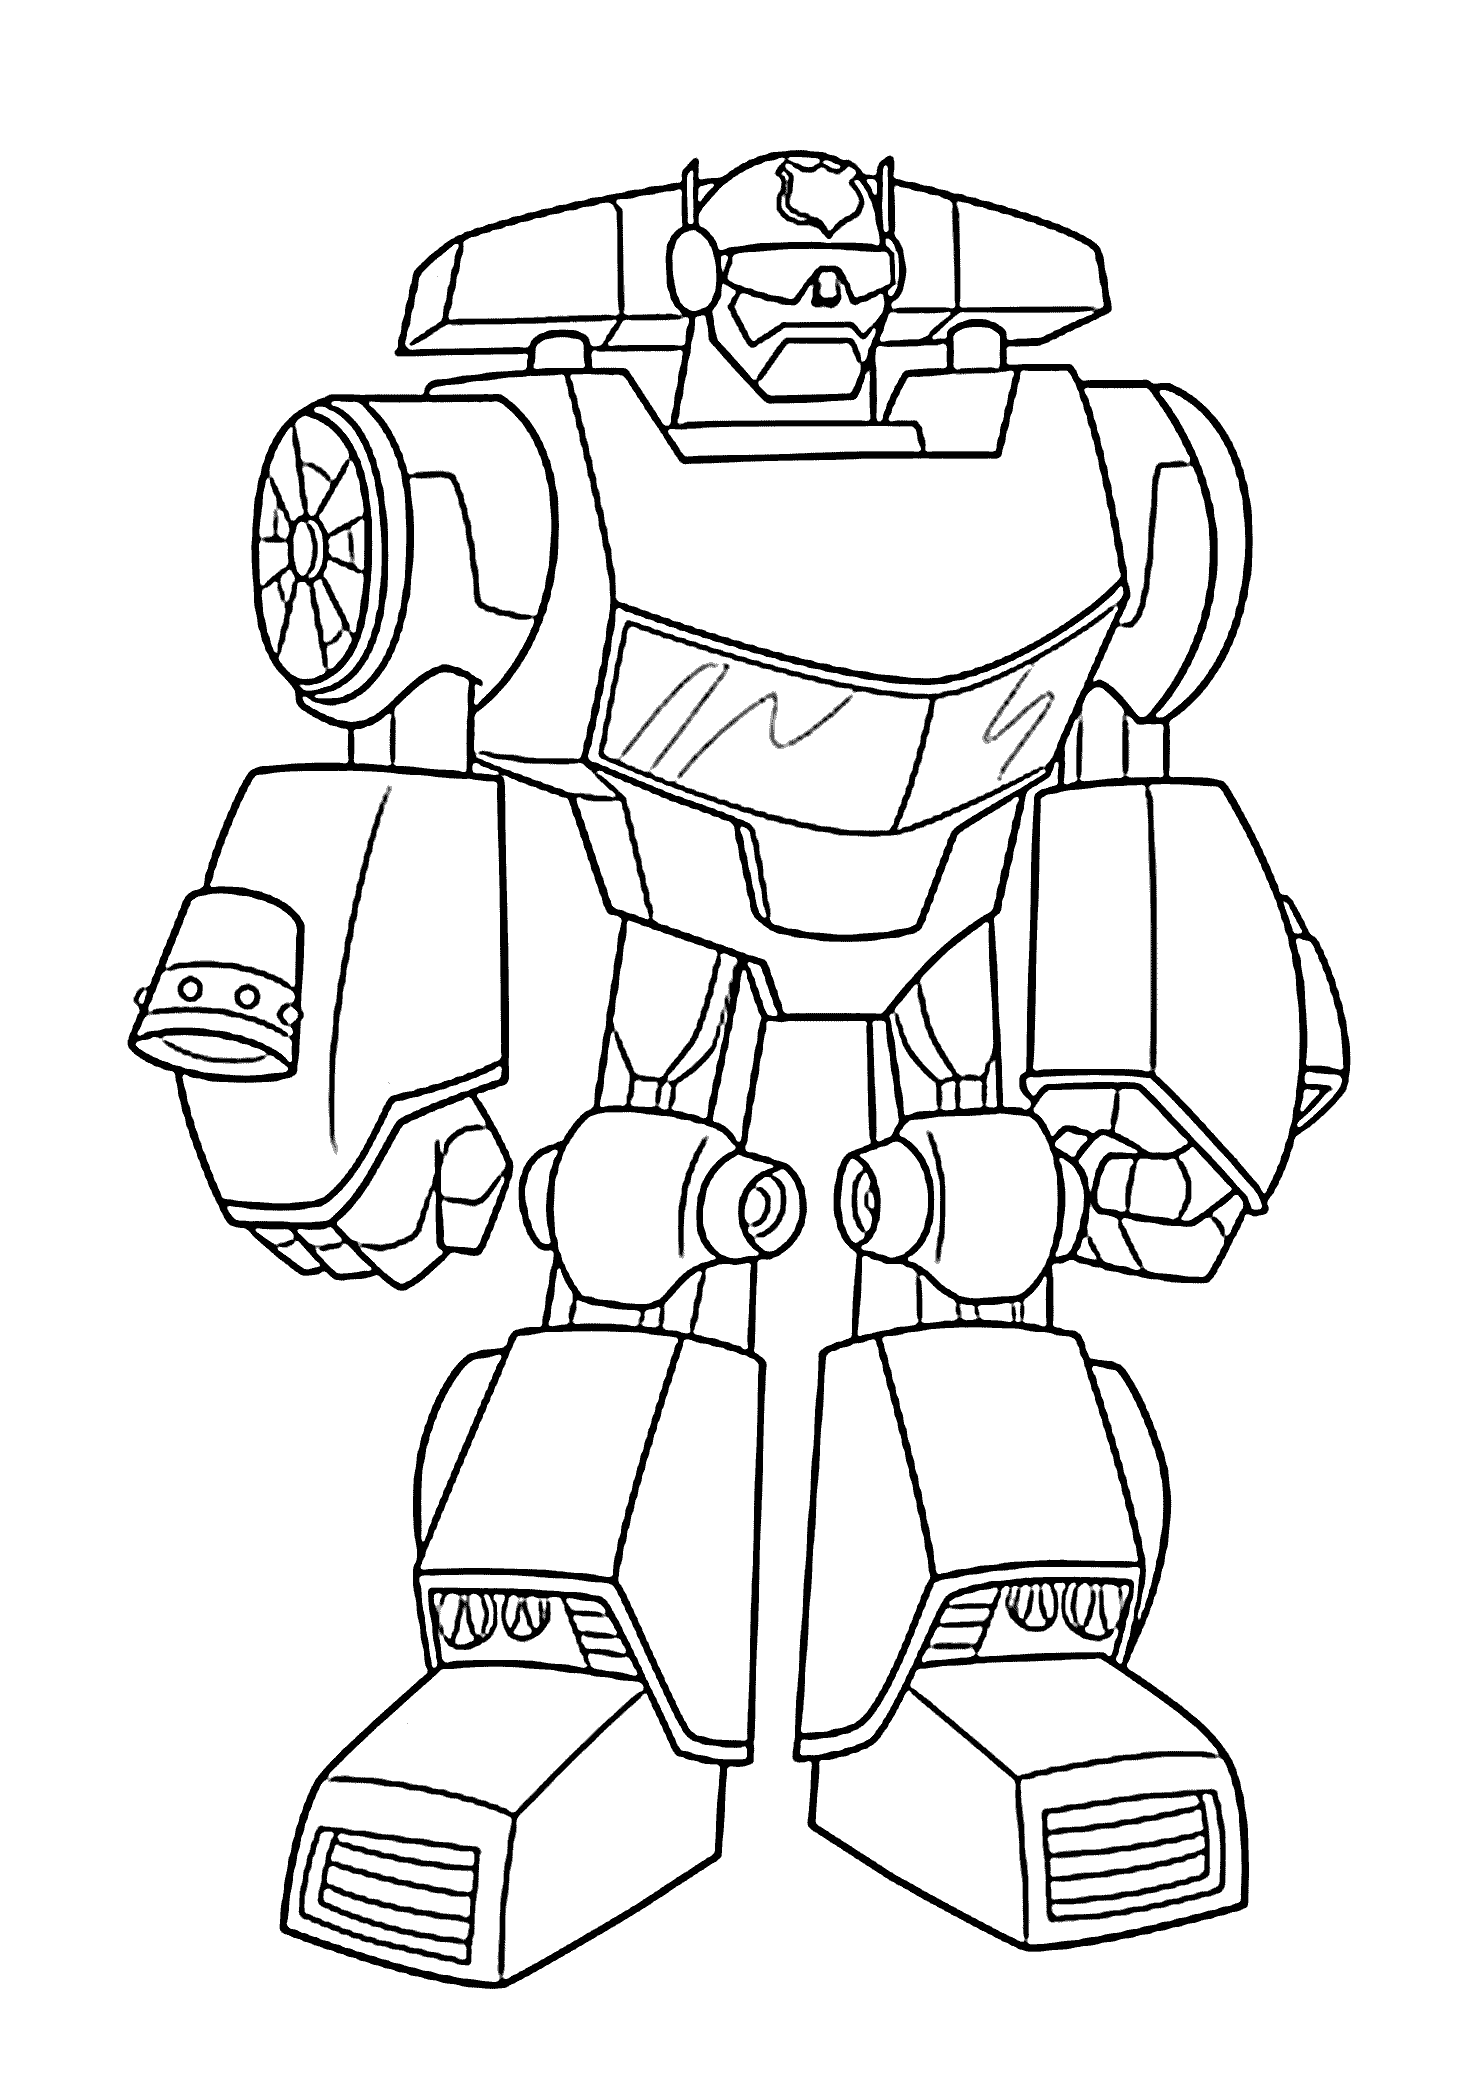 20 Printable Transformers Rescue Bots Coloring Pages